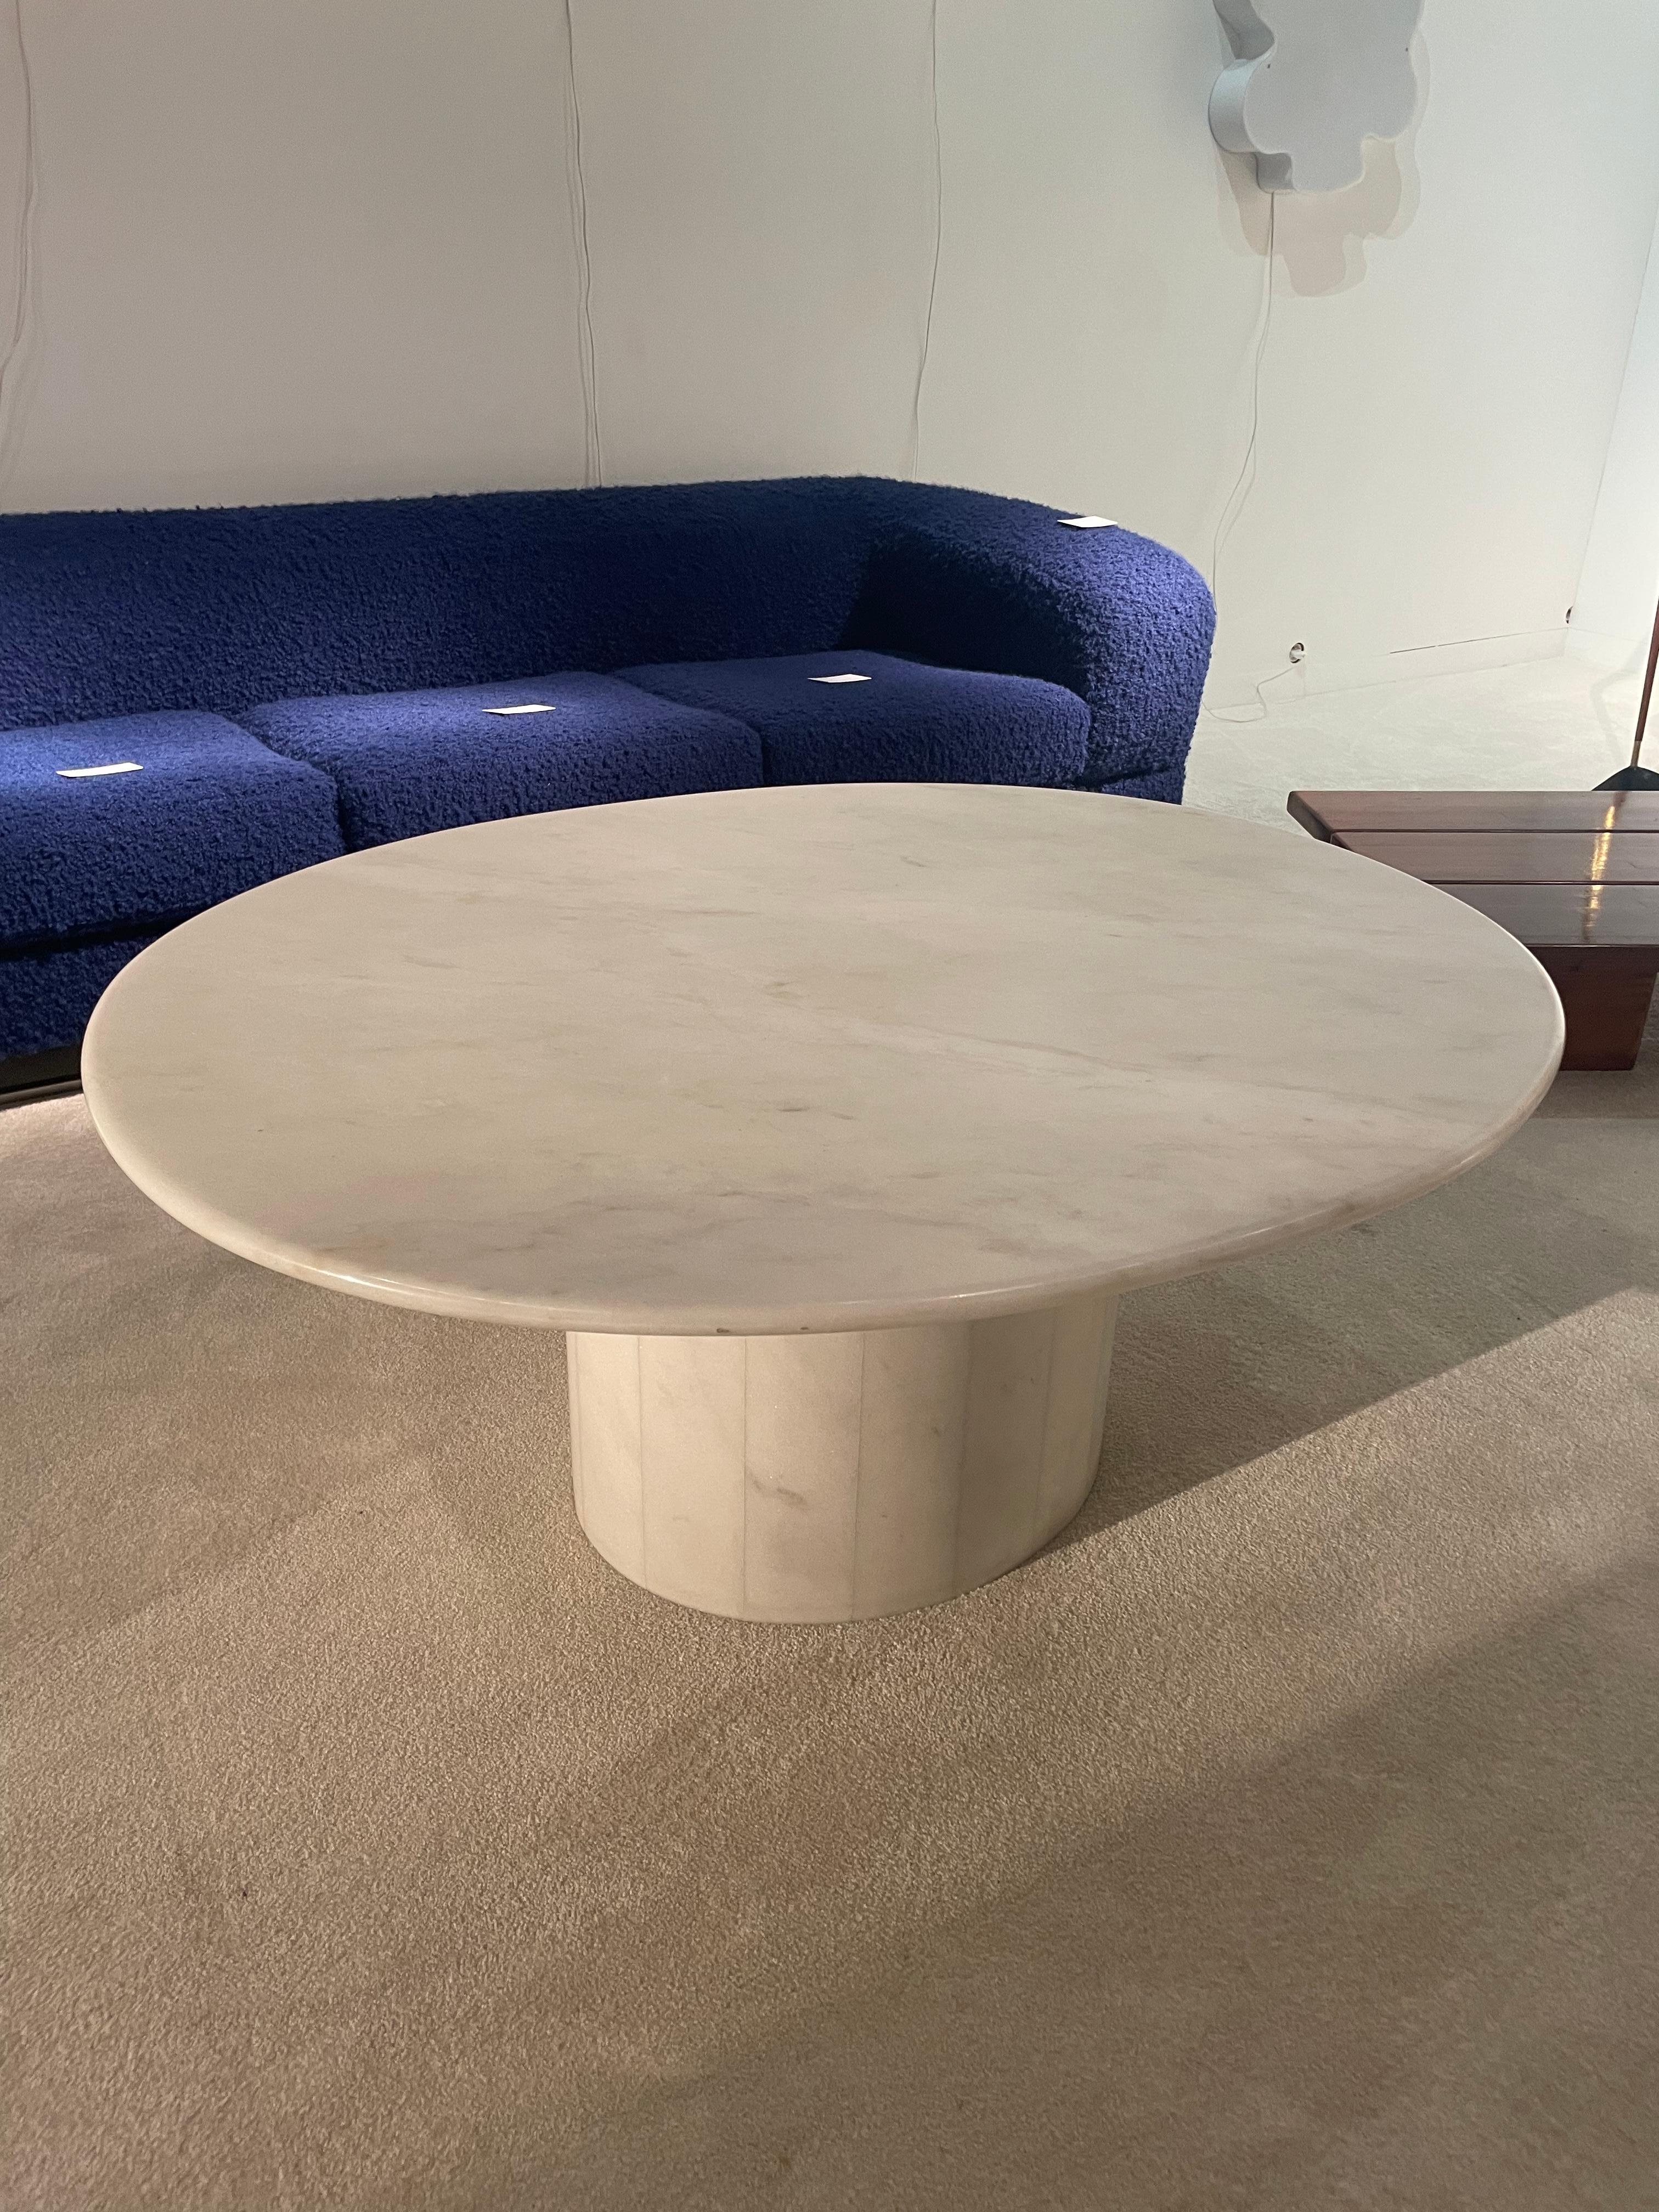 Oval marble coffee table
From 1970.